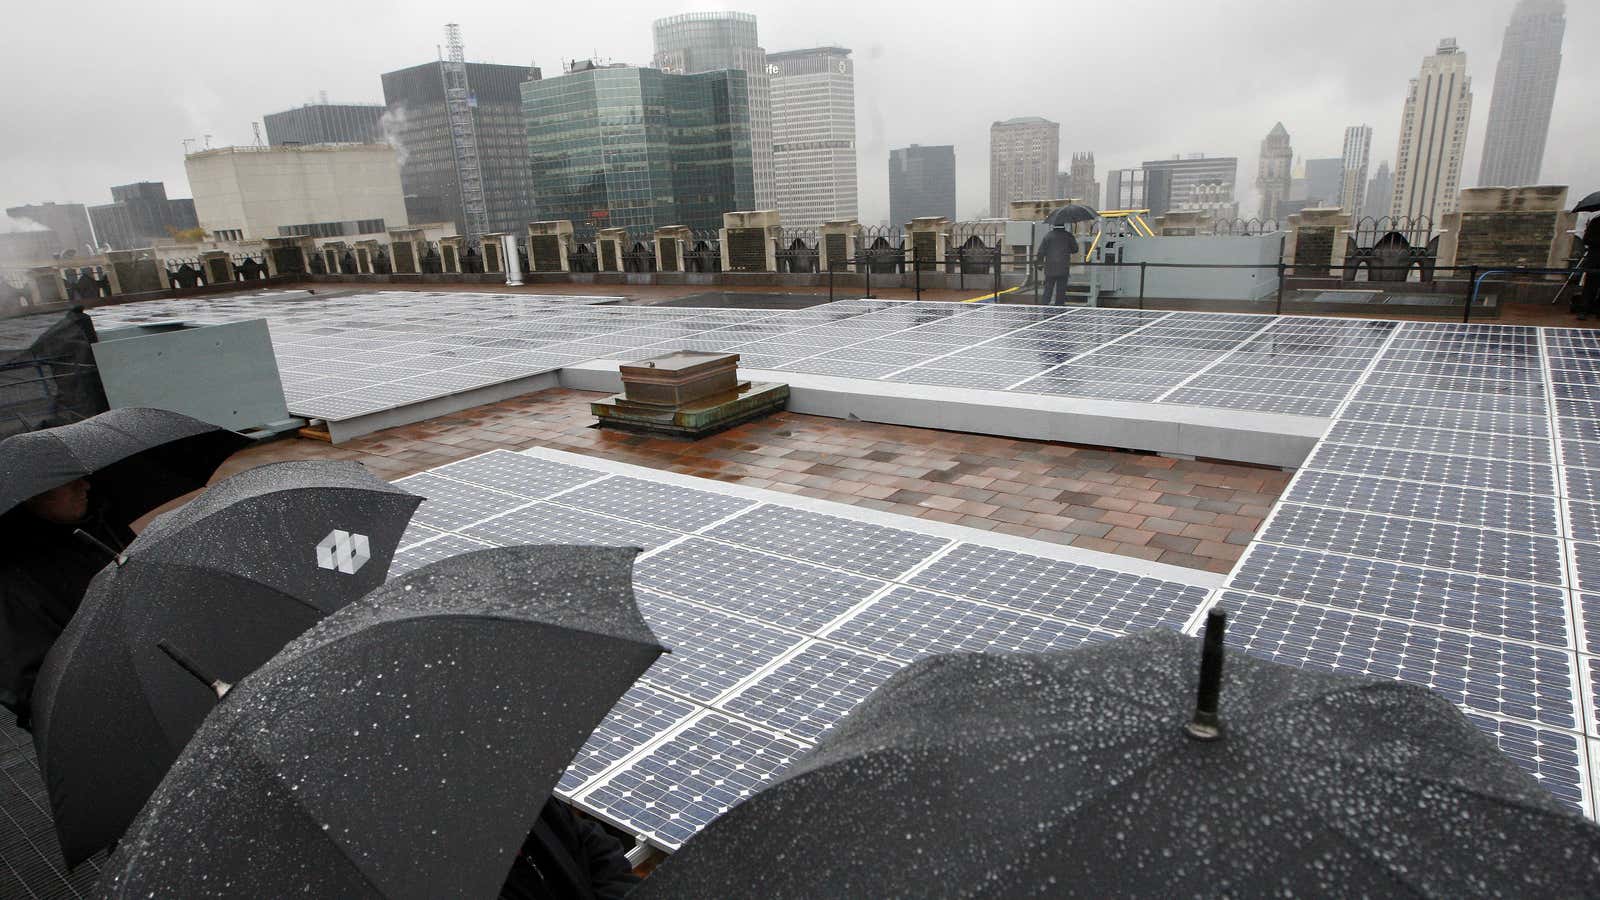 Scientists hope to make solar panels work effectively in rain.